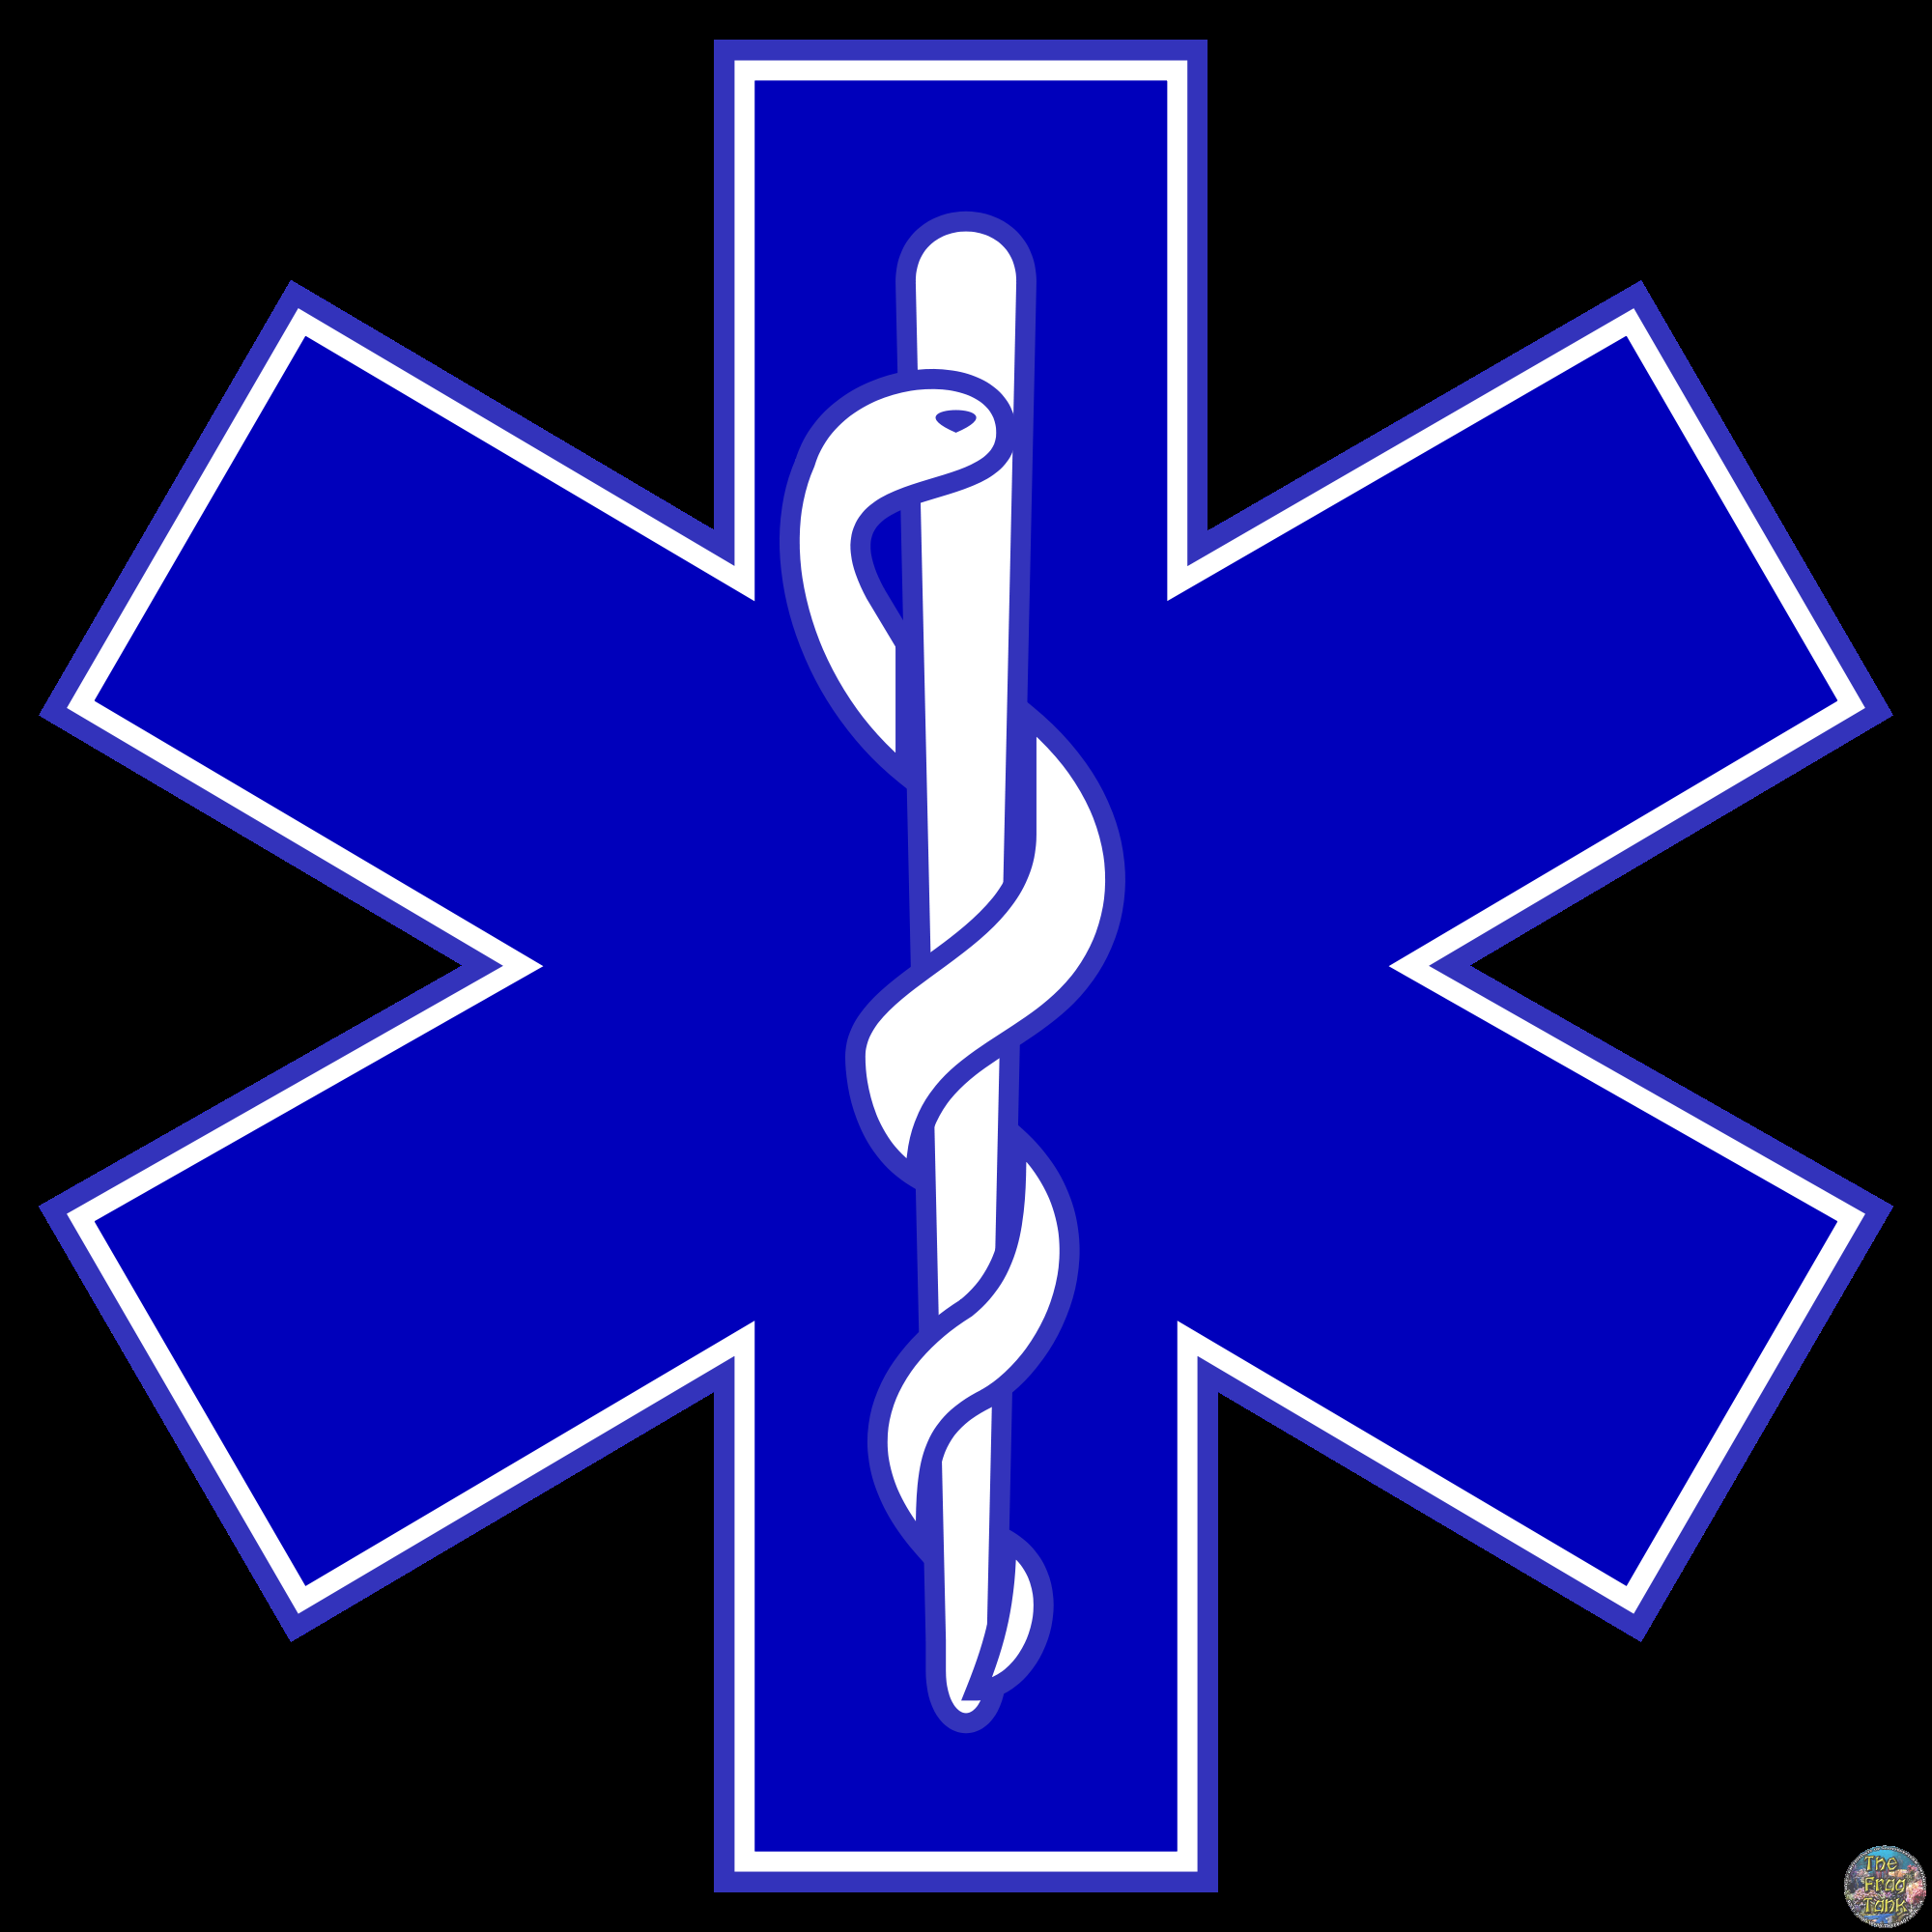 2000px-Star_of_life2.svg.png